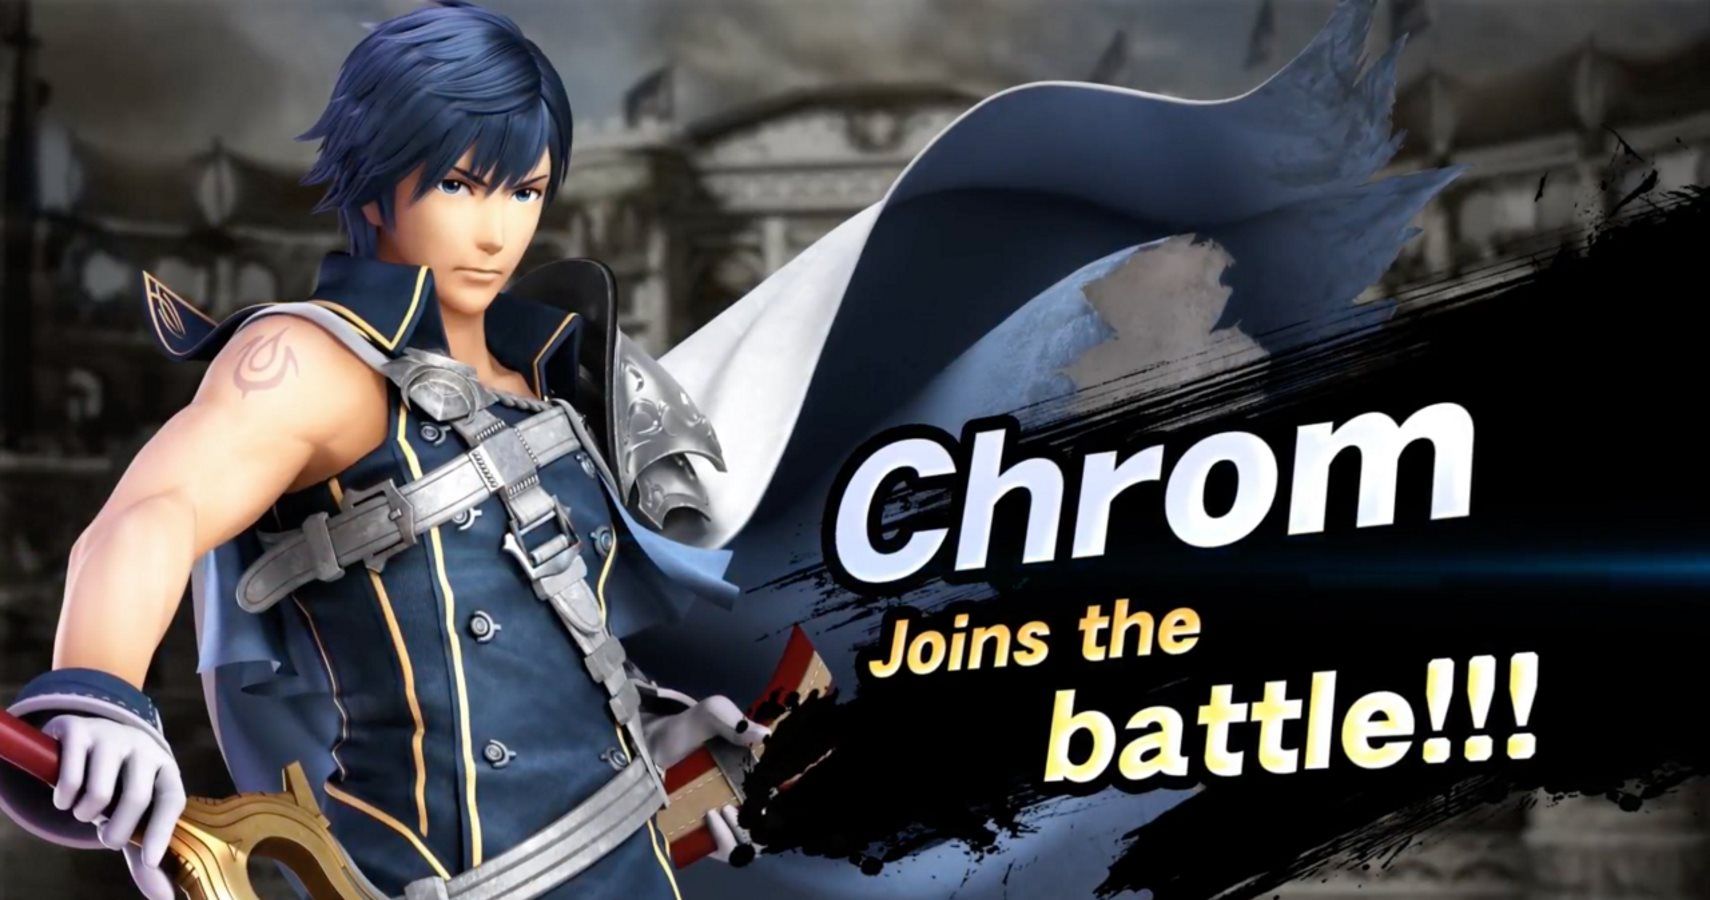 Twitter User Somehow Accurately Predicts Chrom AND Banana Guns In Smash Bros Before Game Was Even Announced